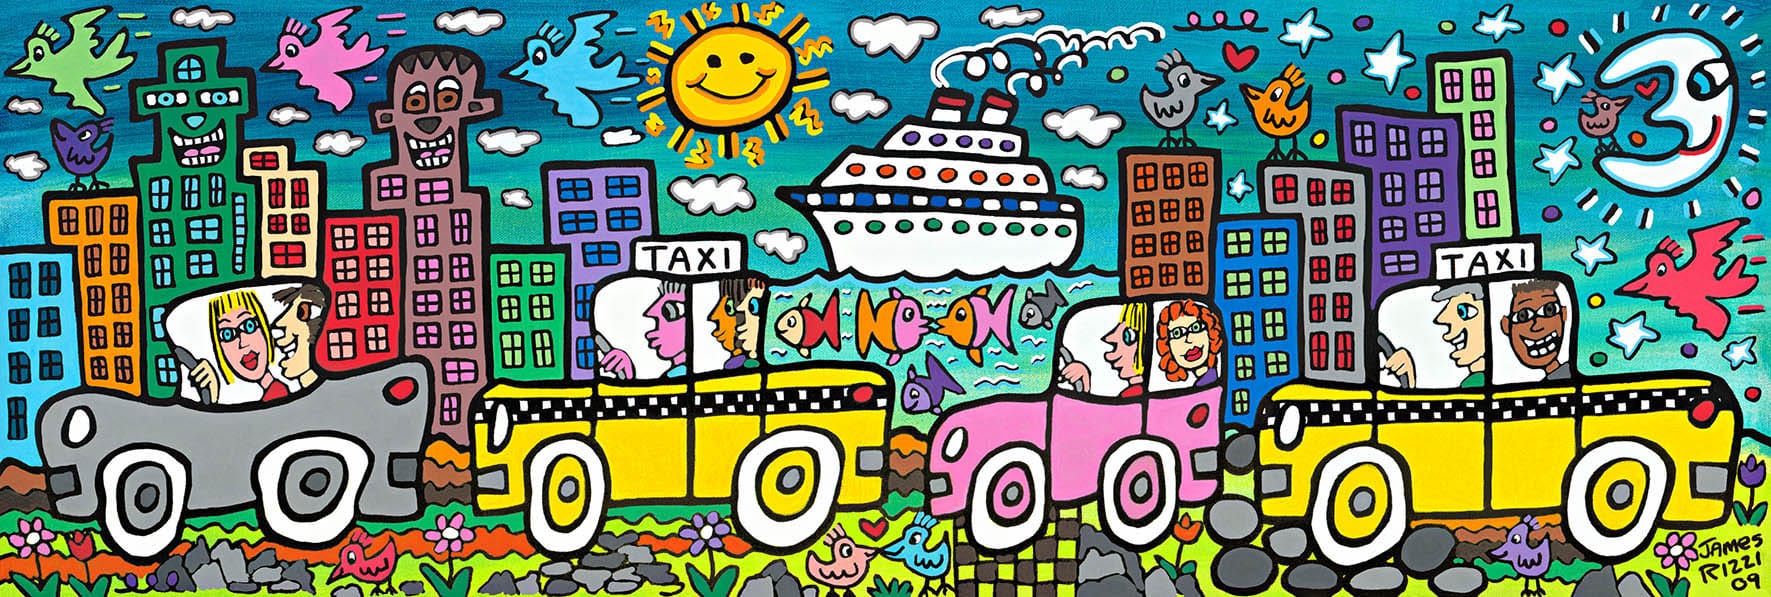 James-Rizzi-Lets-go-someplace-fun